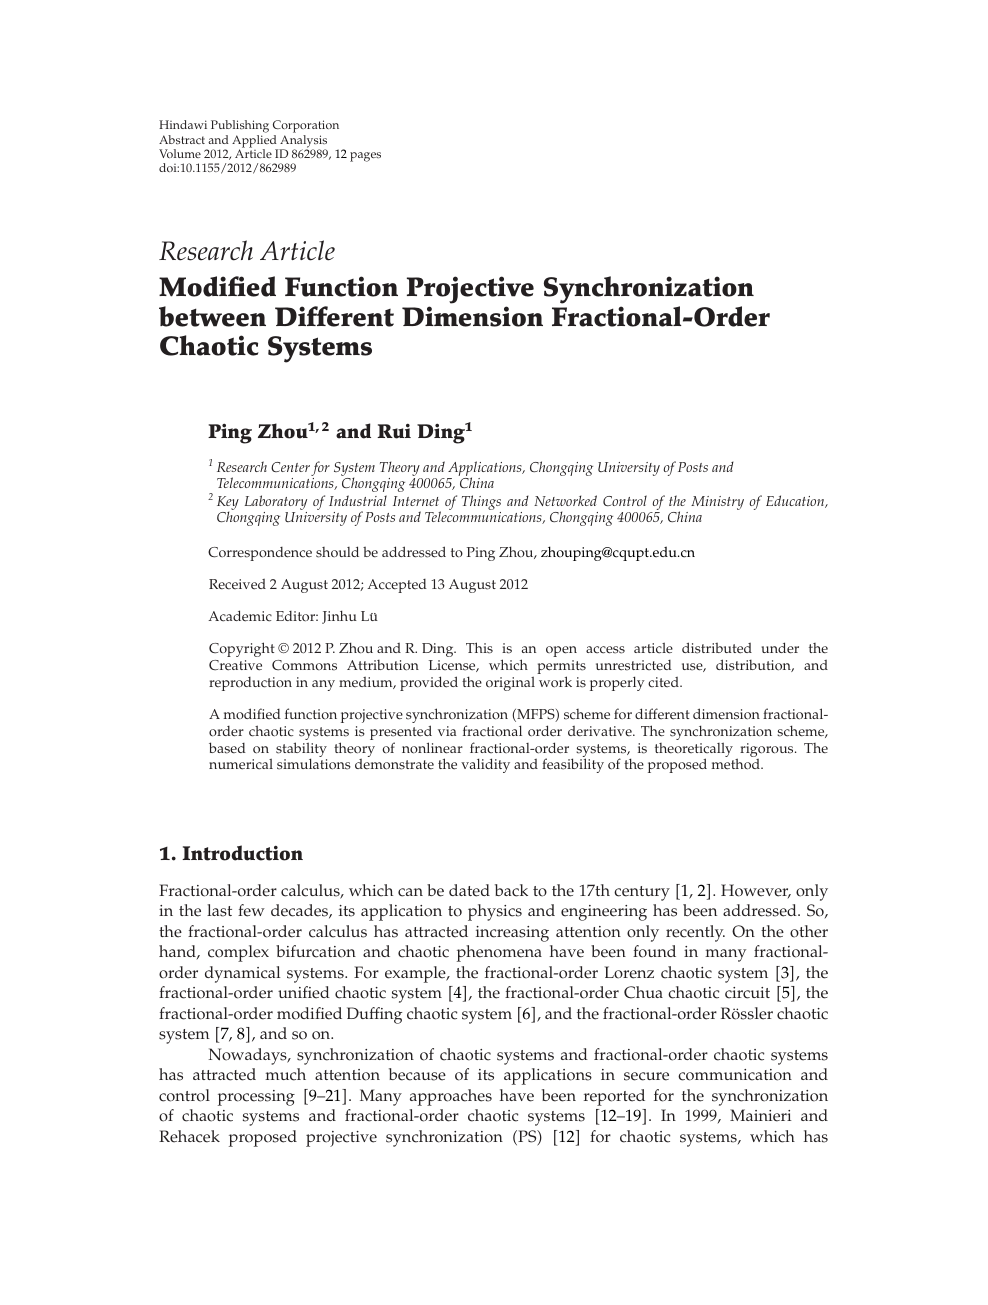 Modified Function Projective Synchronization between Different Dimension  Fractional-Order Chaotic Systems – topic of research paper in Mathematics.  Download scholarly article PDF and read for free on CyberLeninka open  science hub.